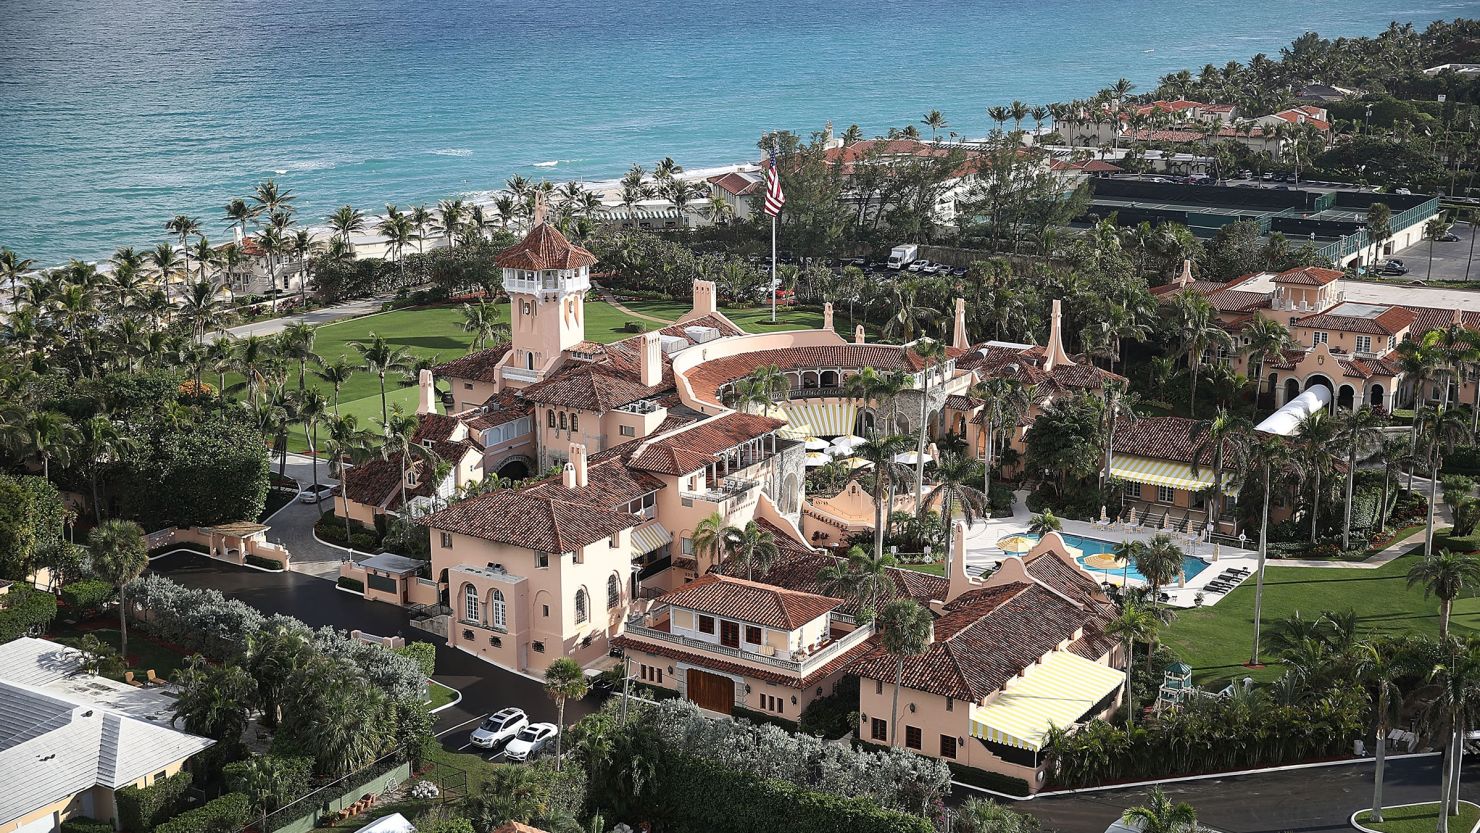 Donald Trump's beach front Mar-a-Lago resort on January 11, 2018 in Palm Beach, Florida.